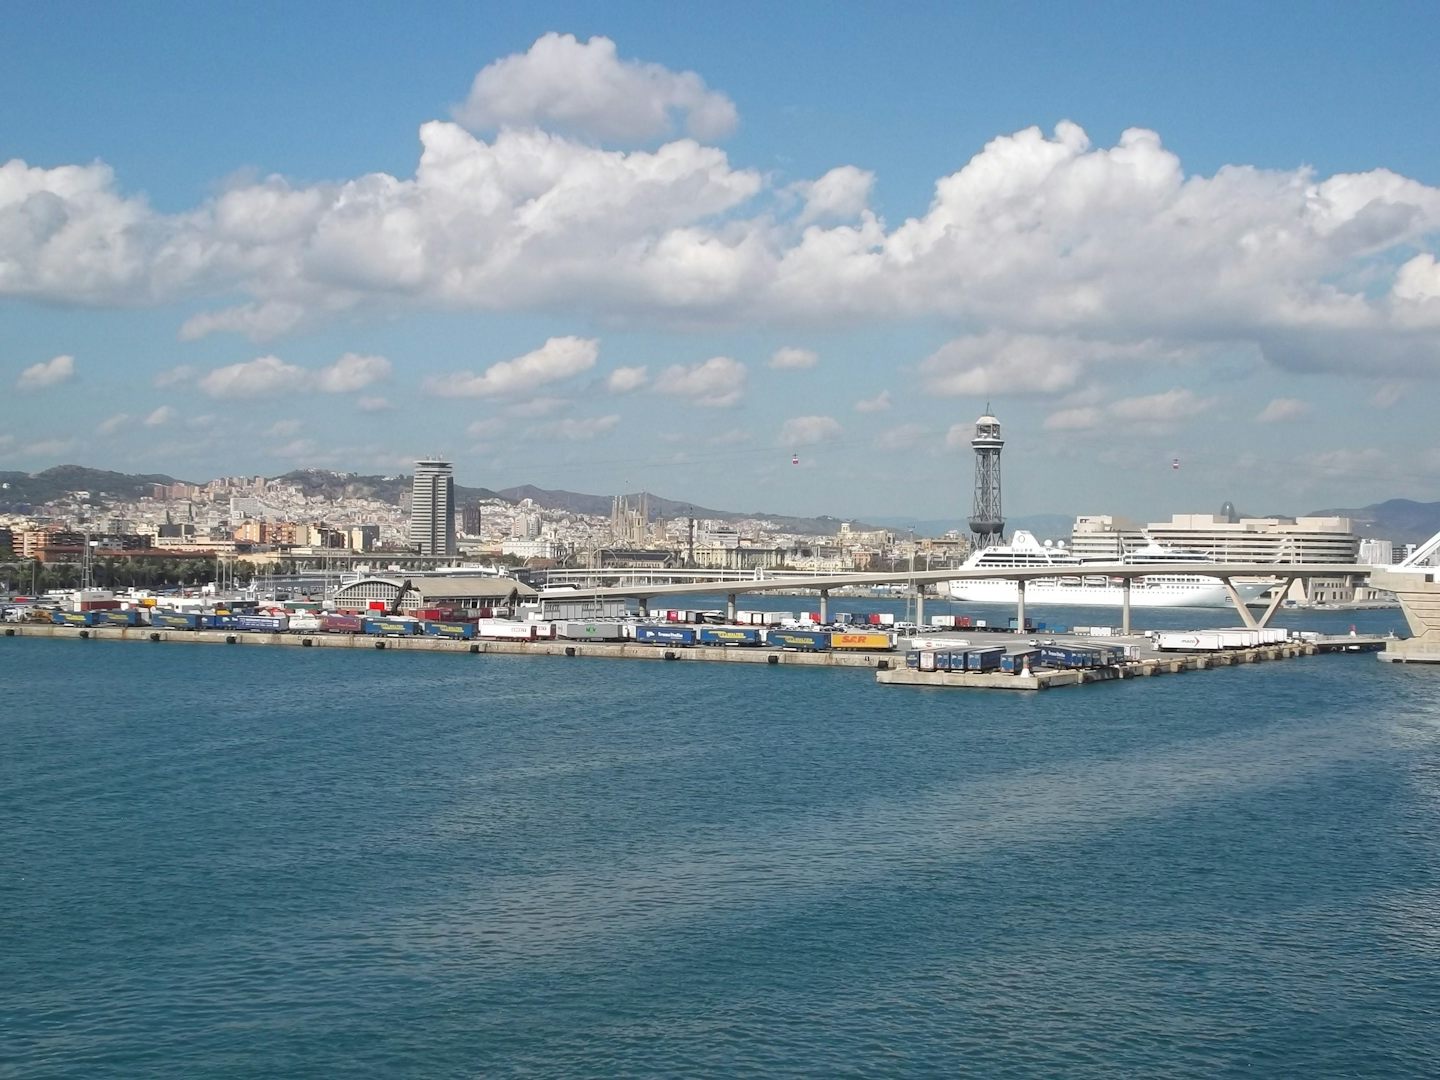 Barcelona, from the ship.